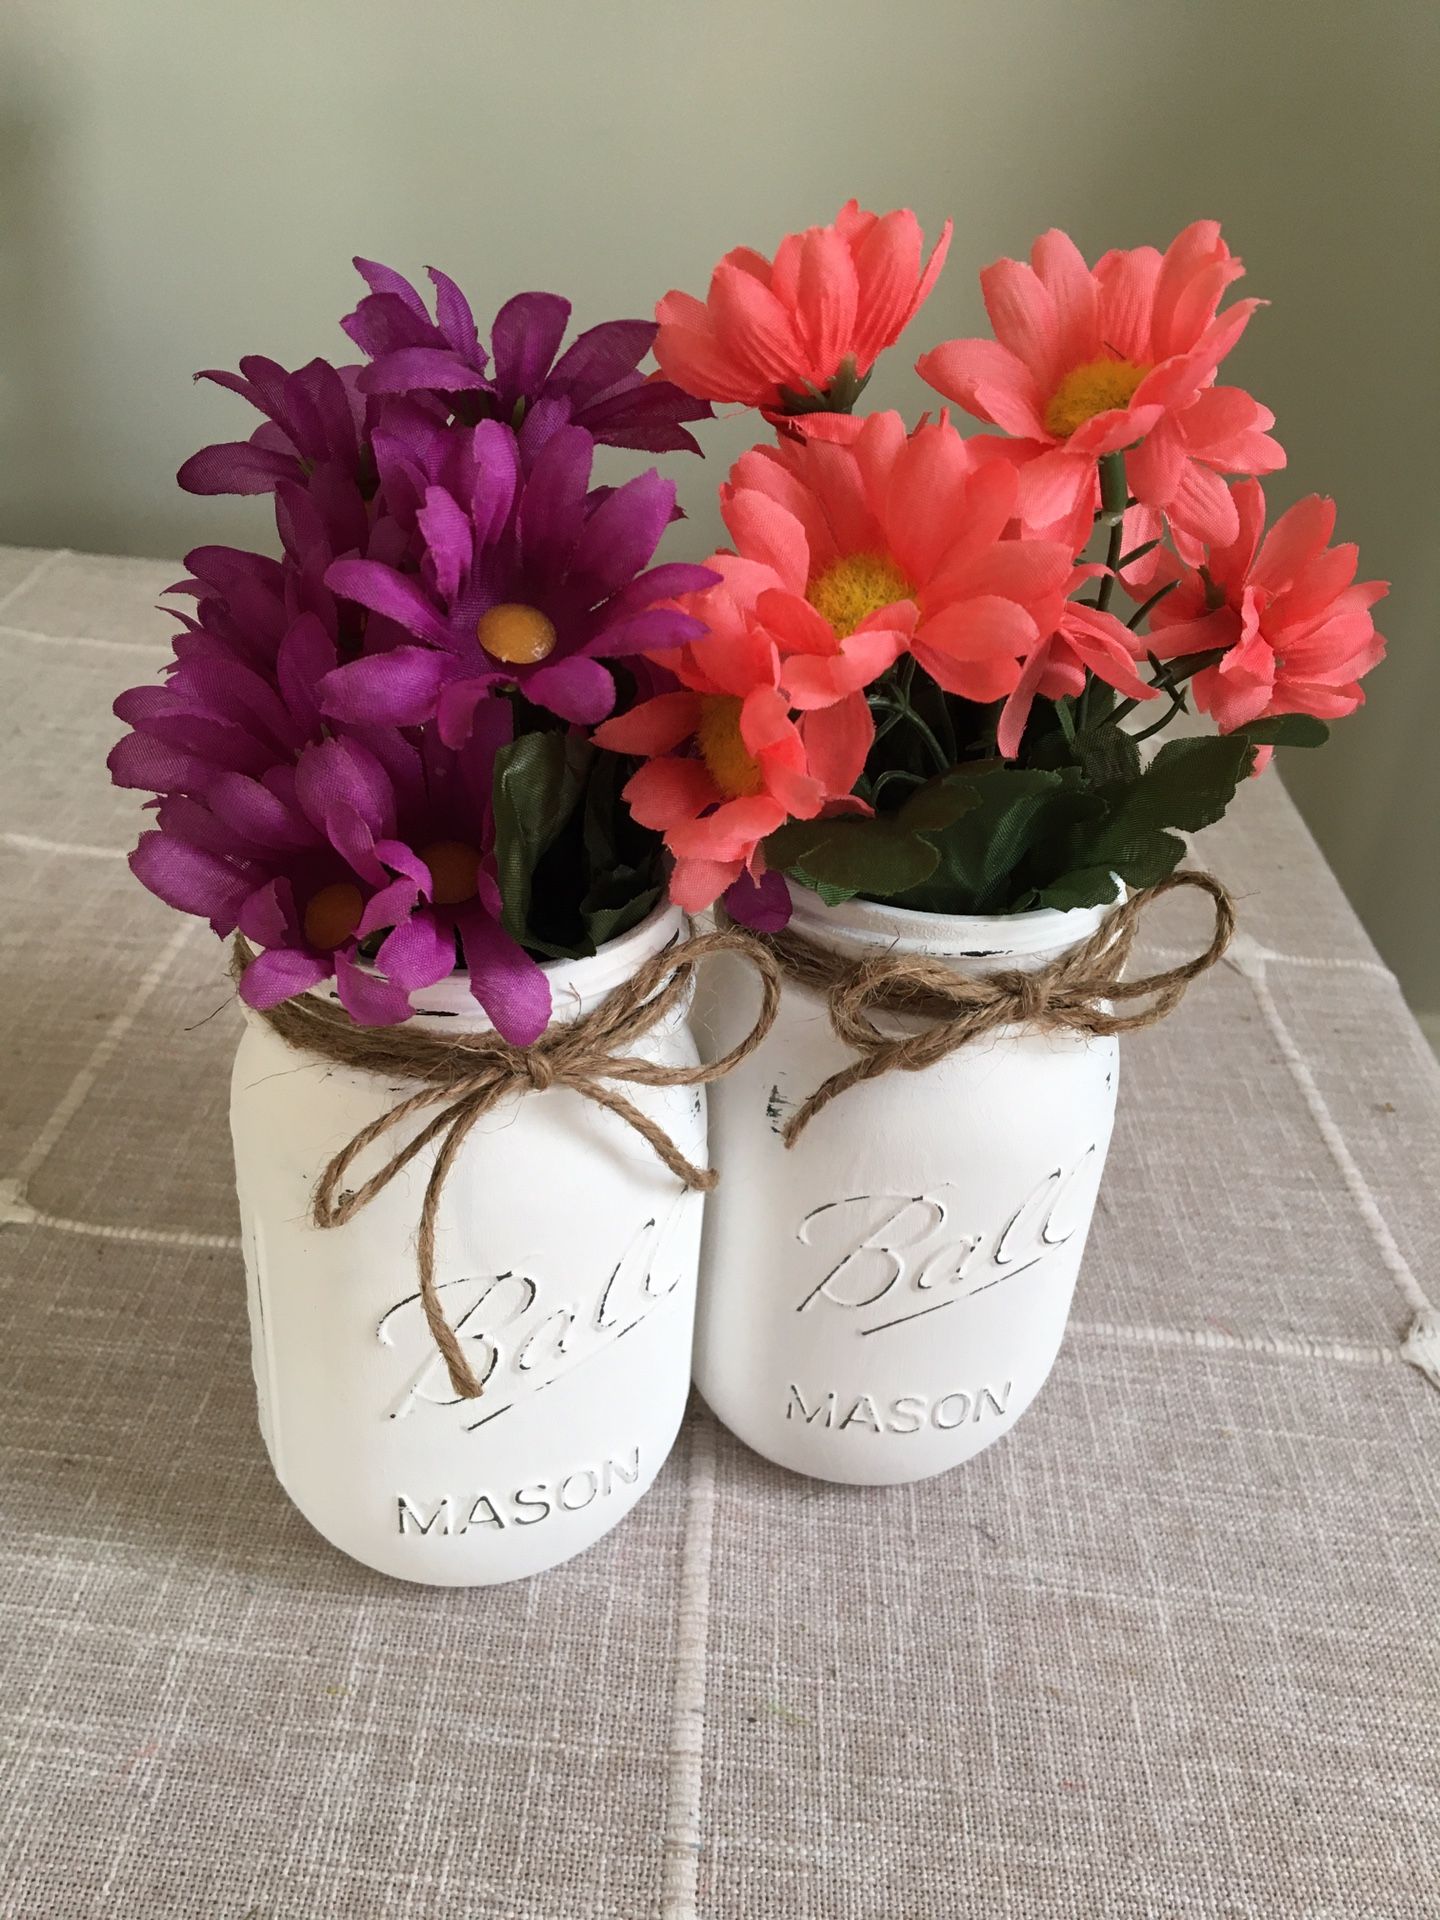 Distressed mason jar vases with silk flowers $10 for both